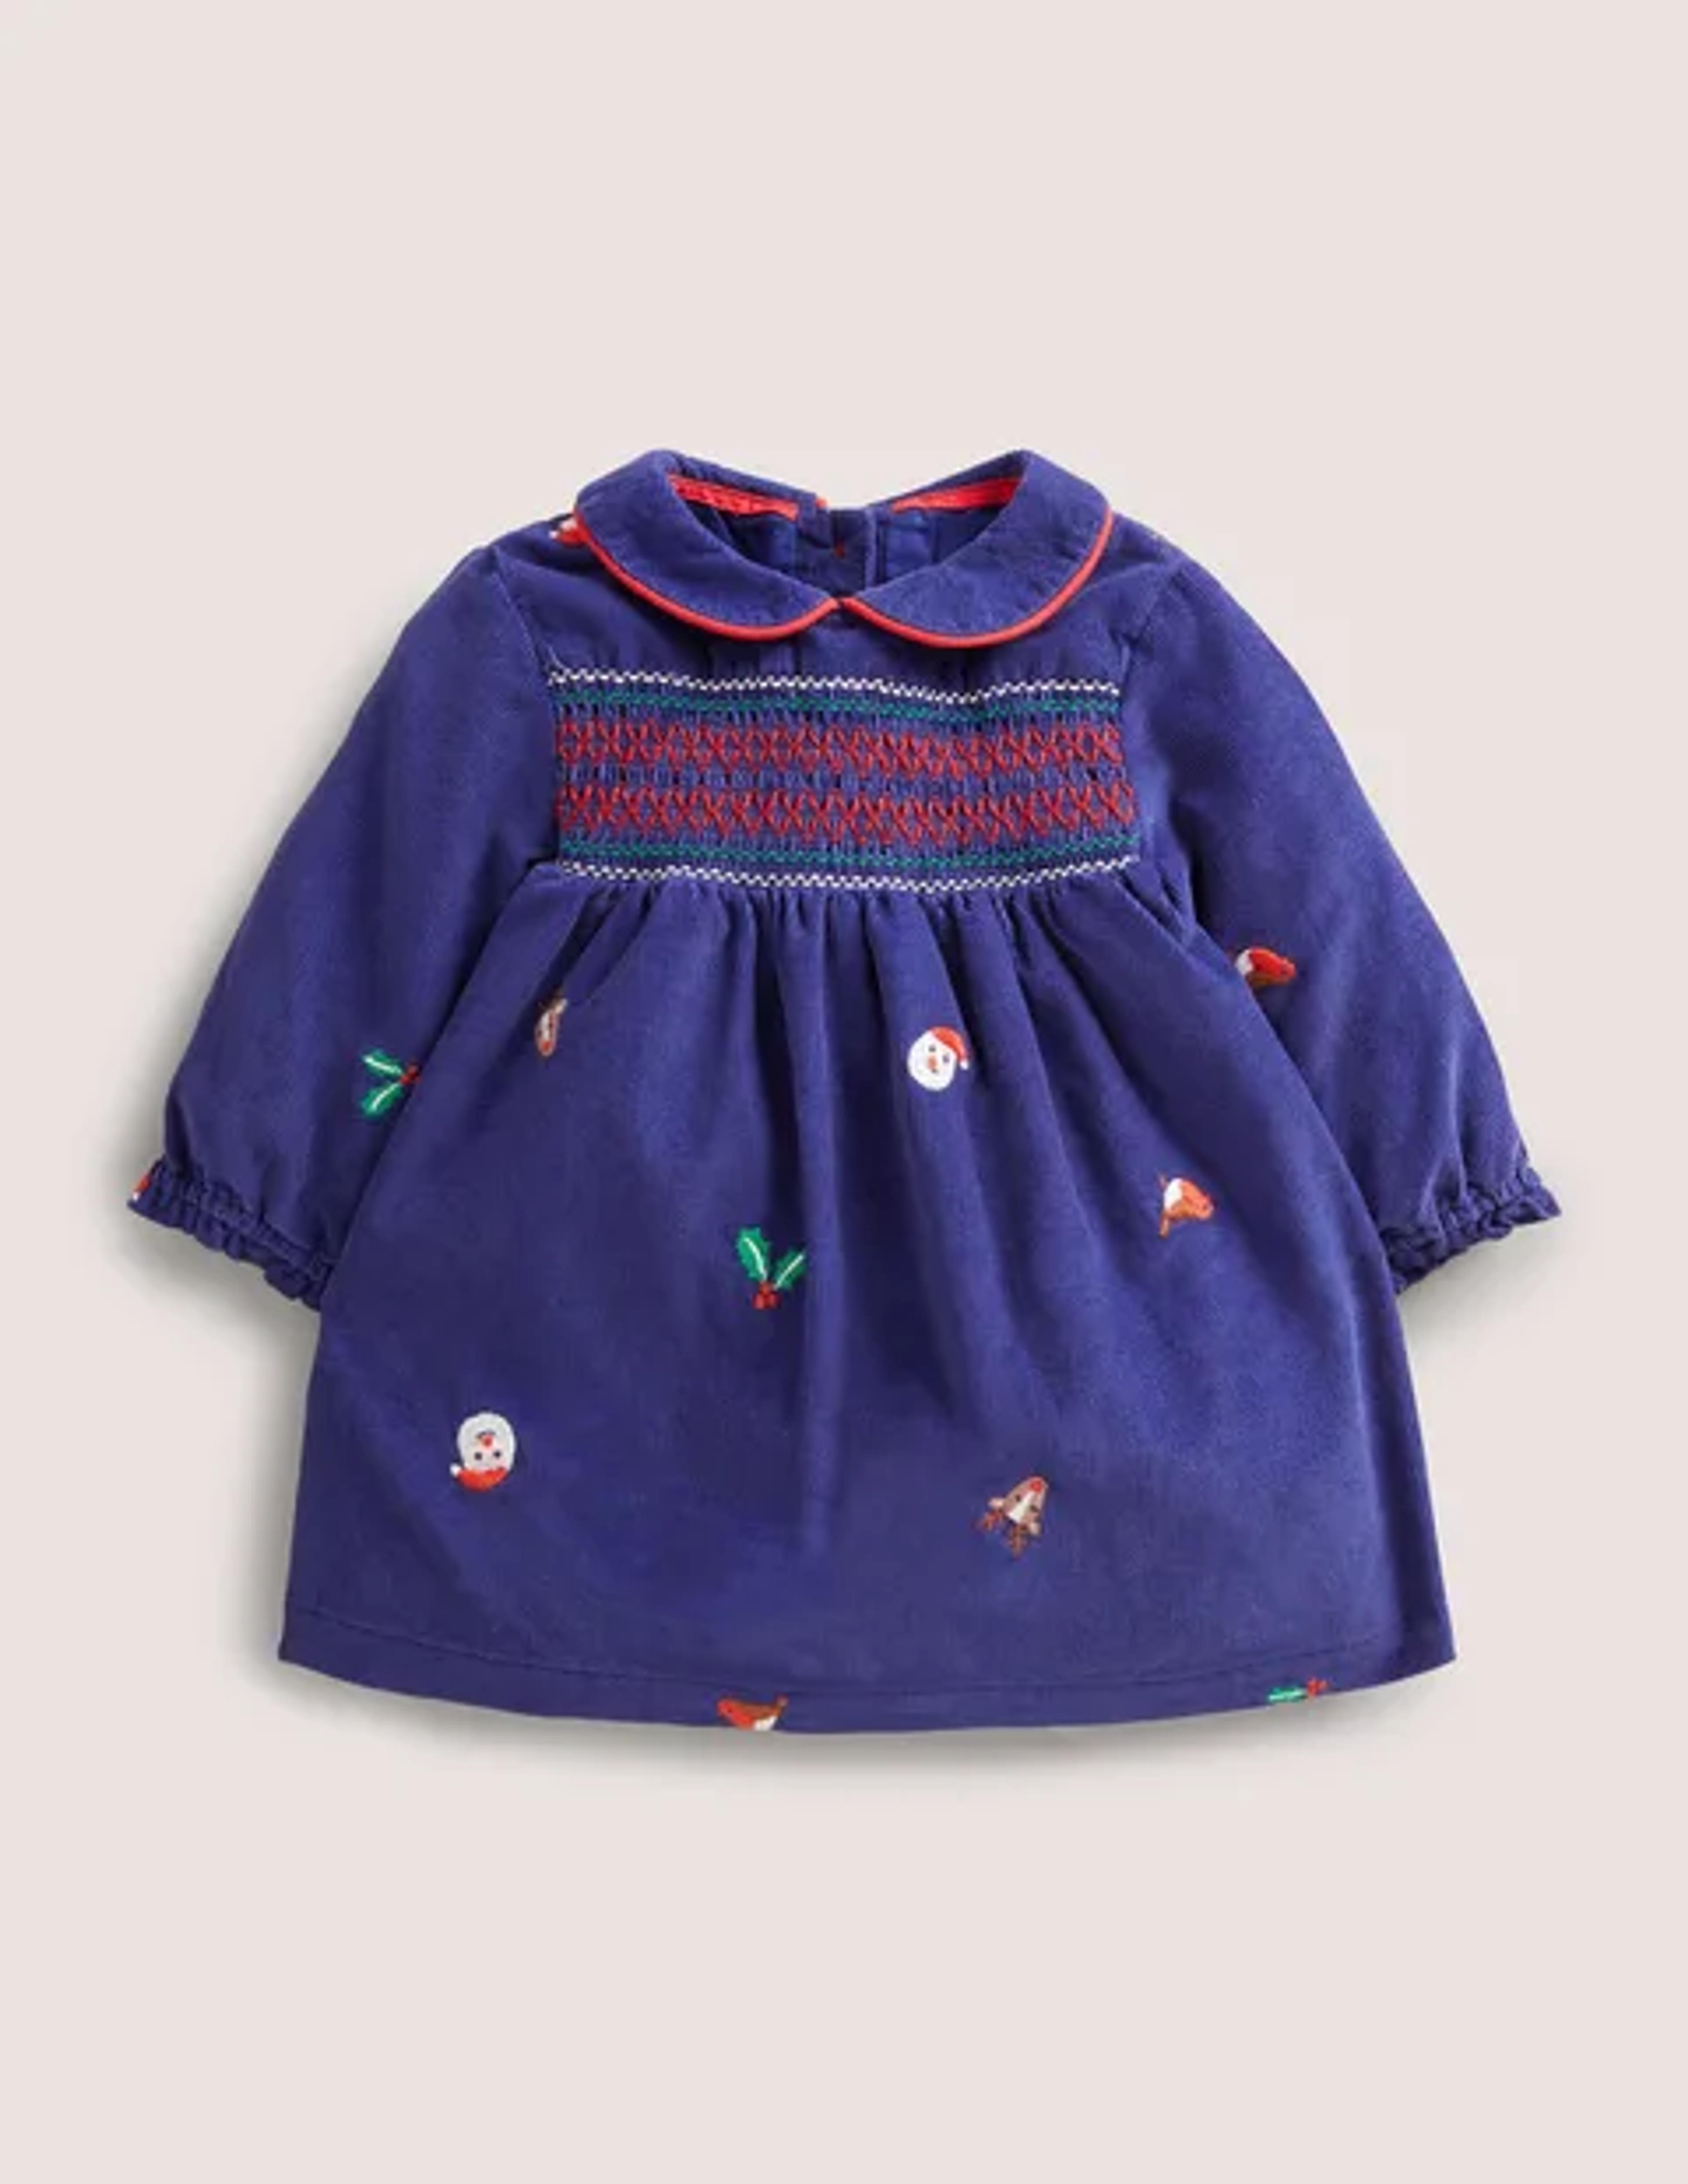 Woven Embroidered Dress - Starboard Blue Festive